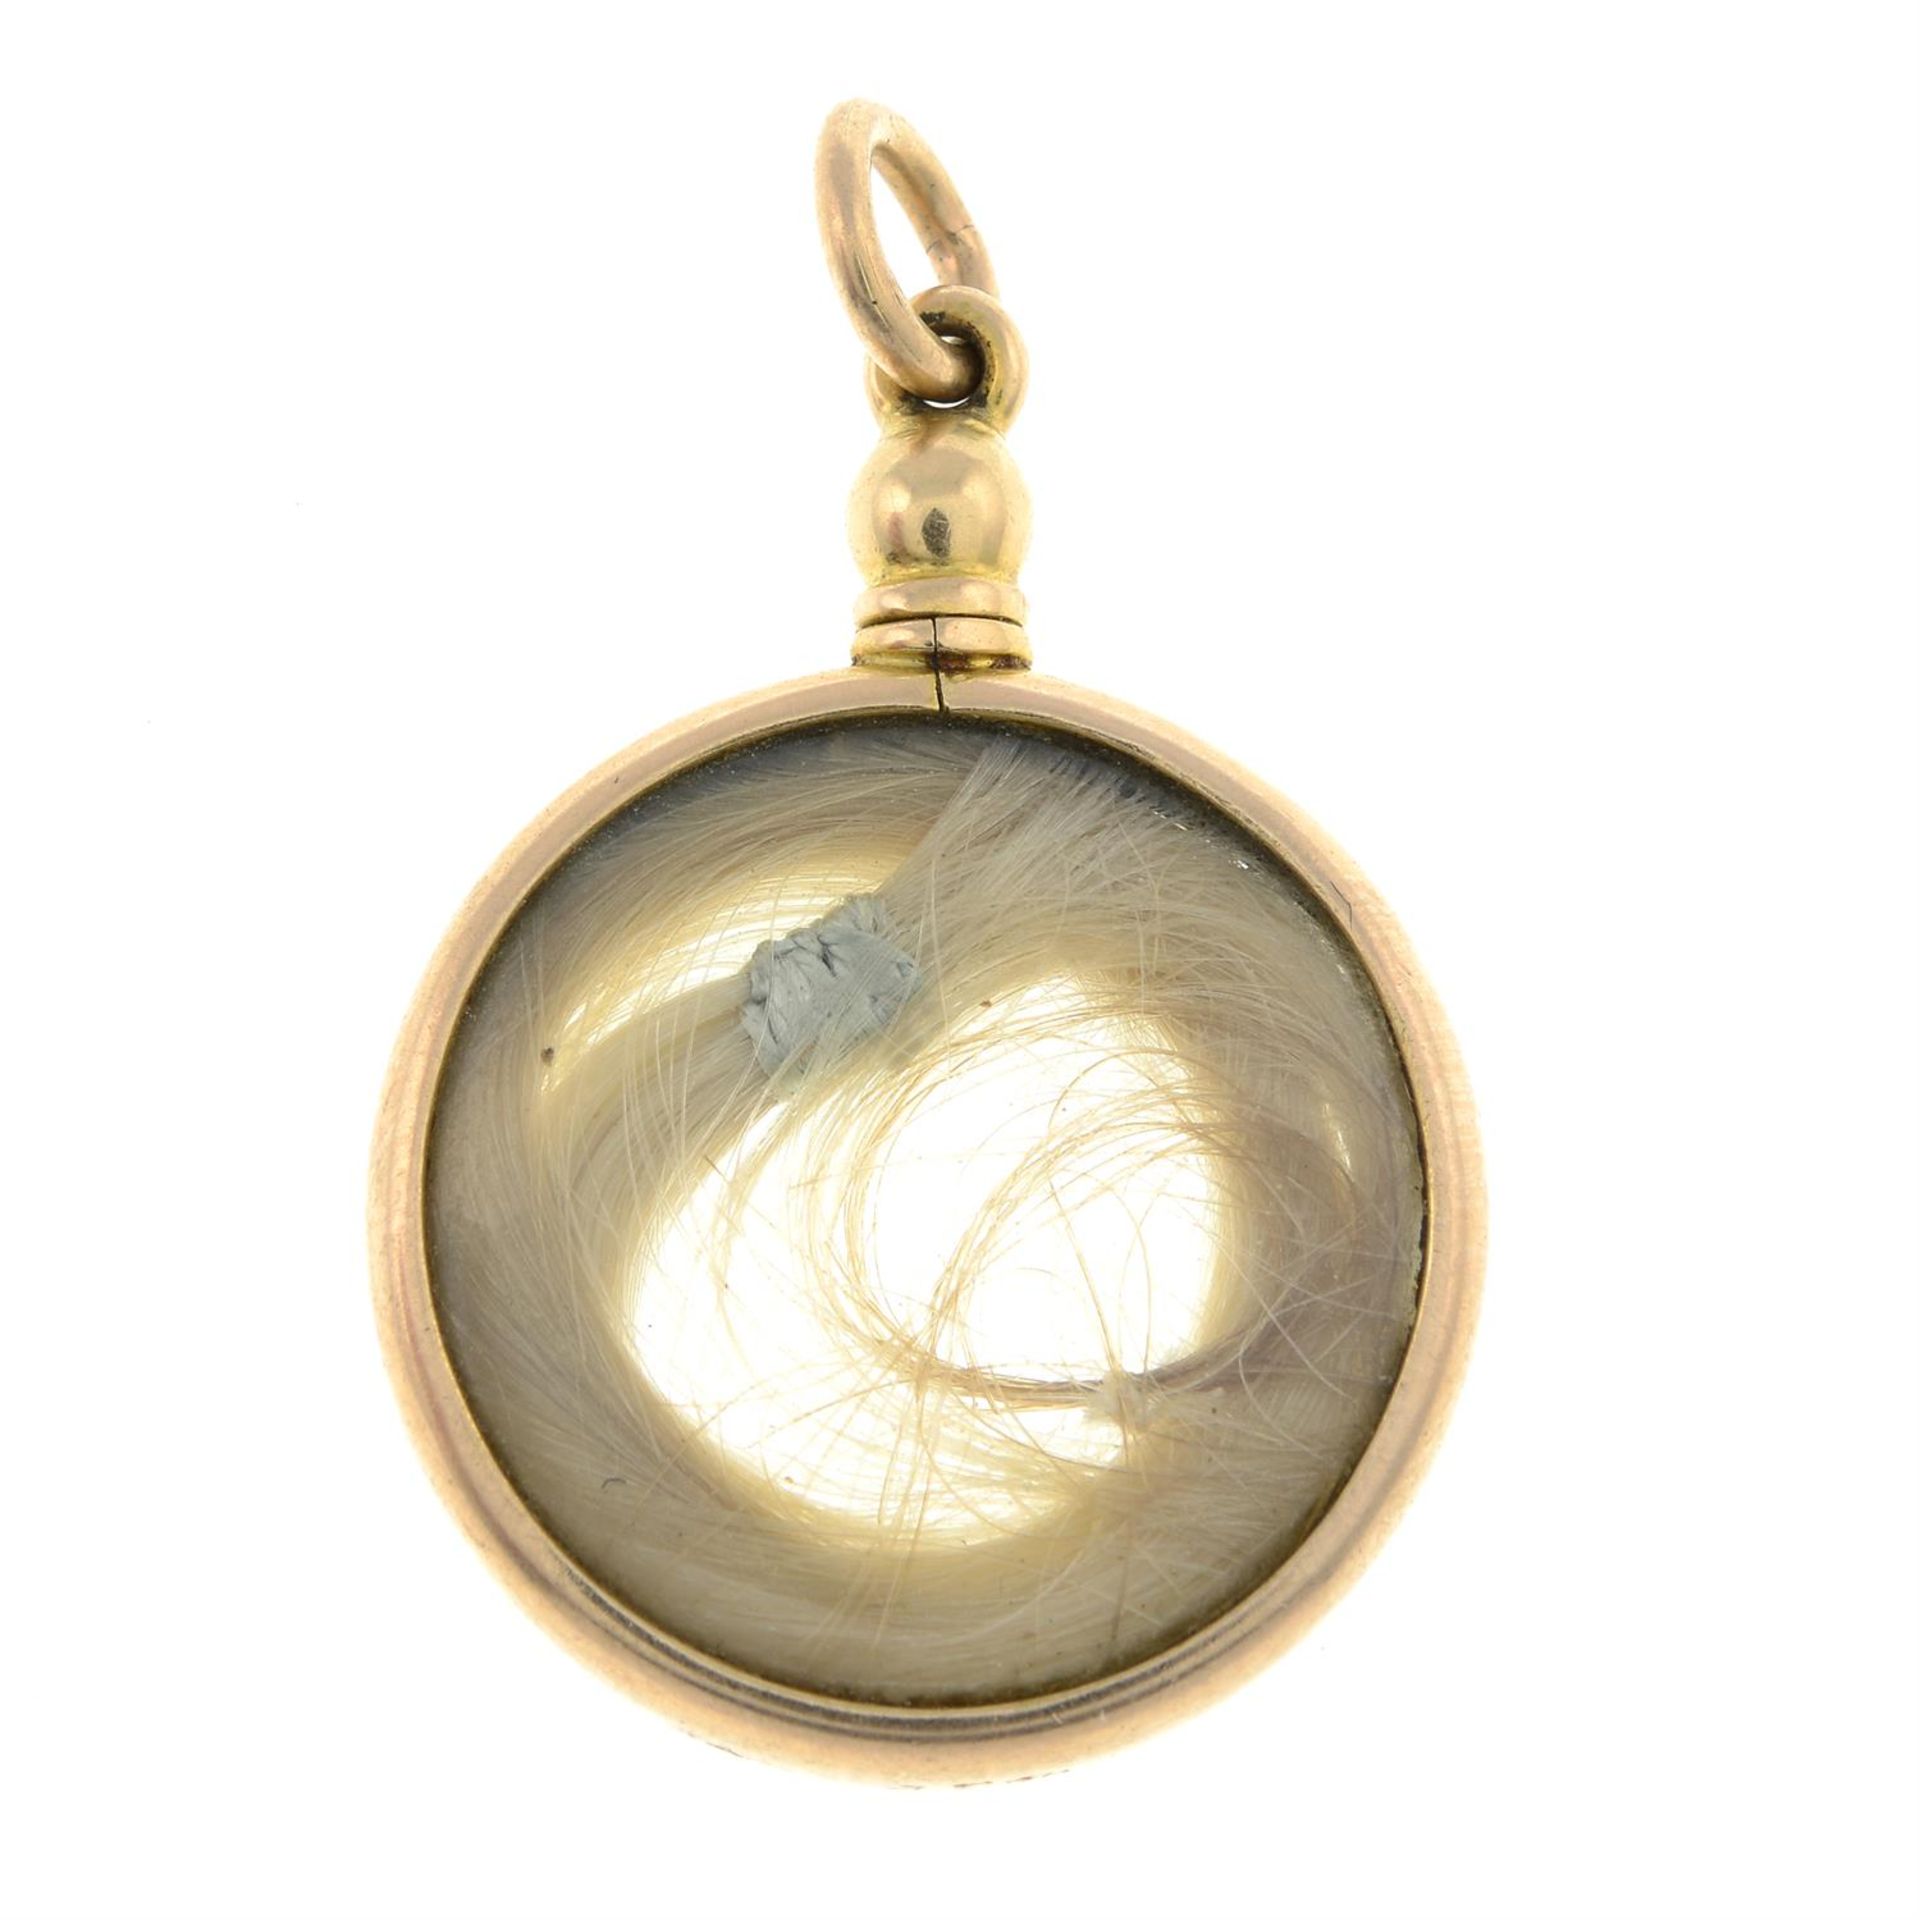 An early 20th century 15ct gold locket, containing a lock of hair.